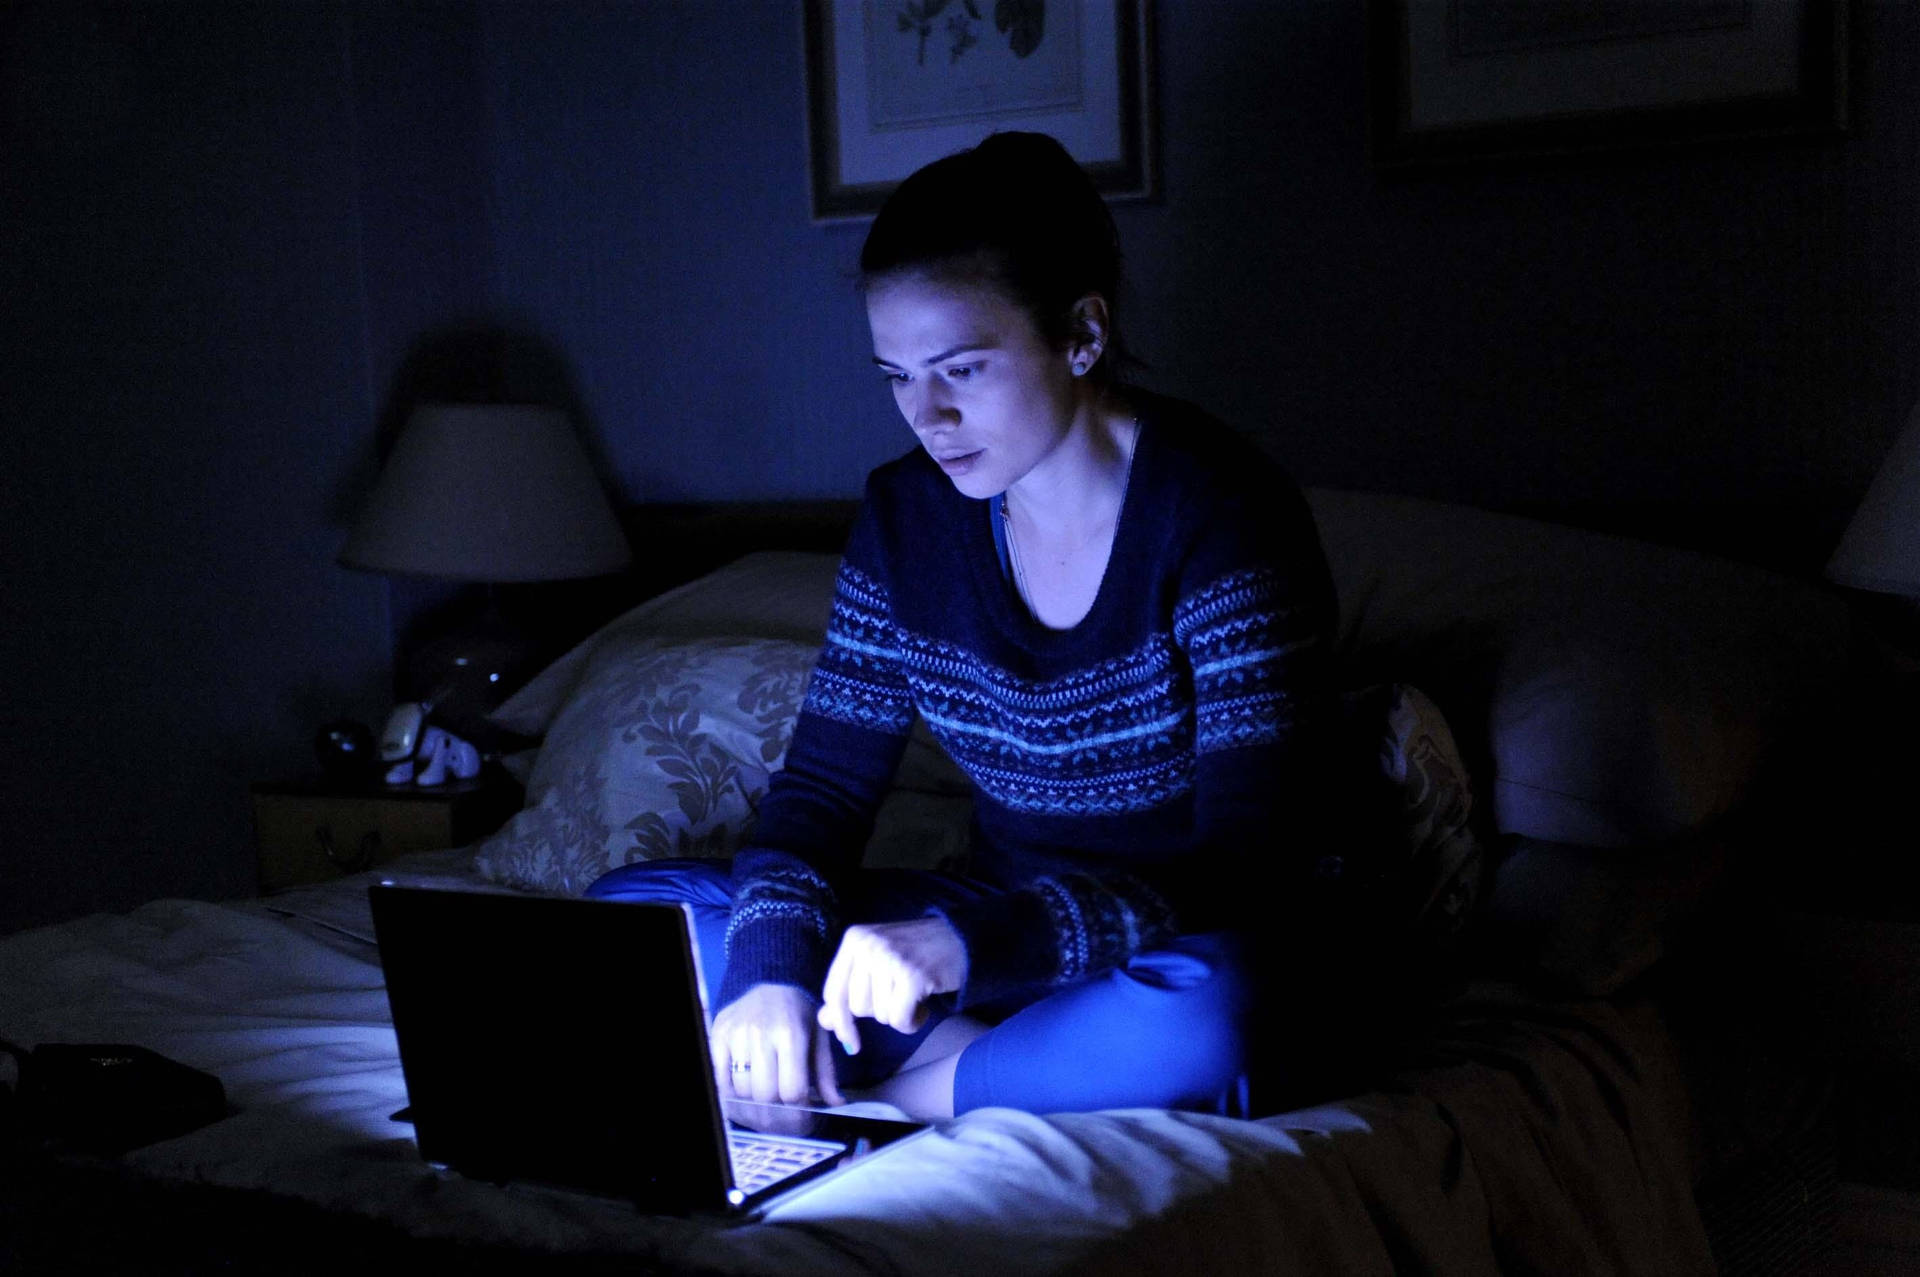 Black Mirror Girl On The Bed With Laptop Wallpaper